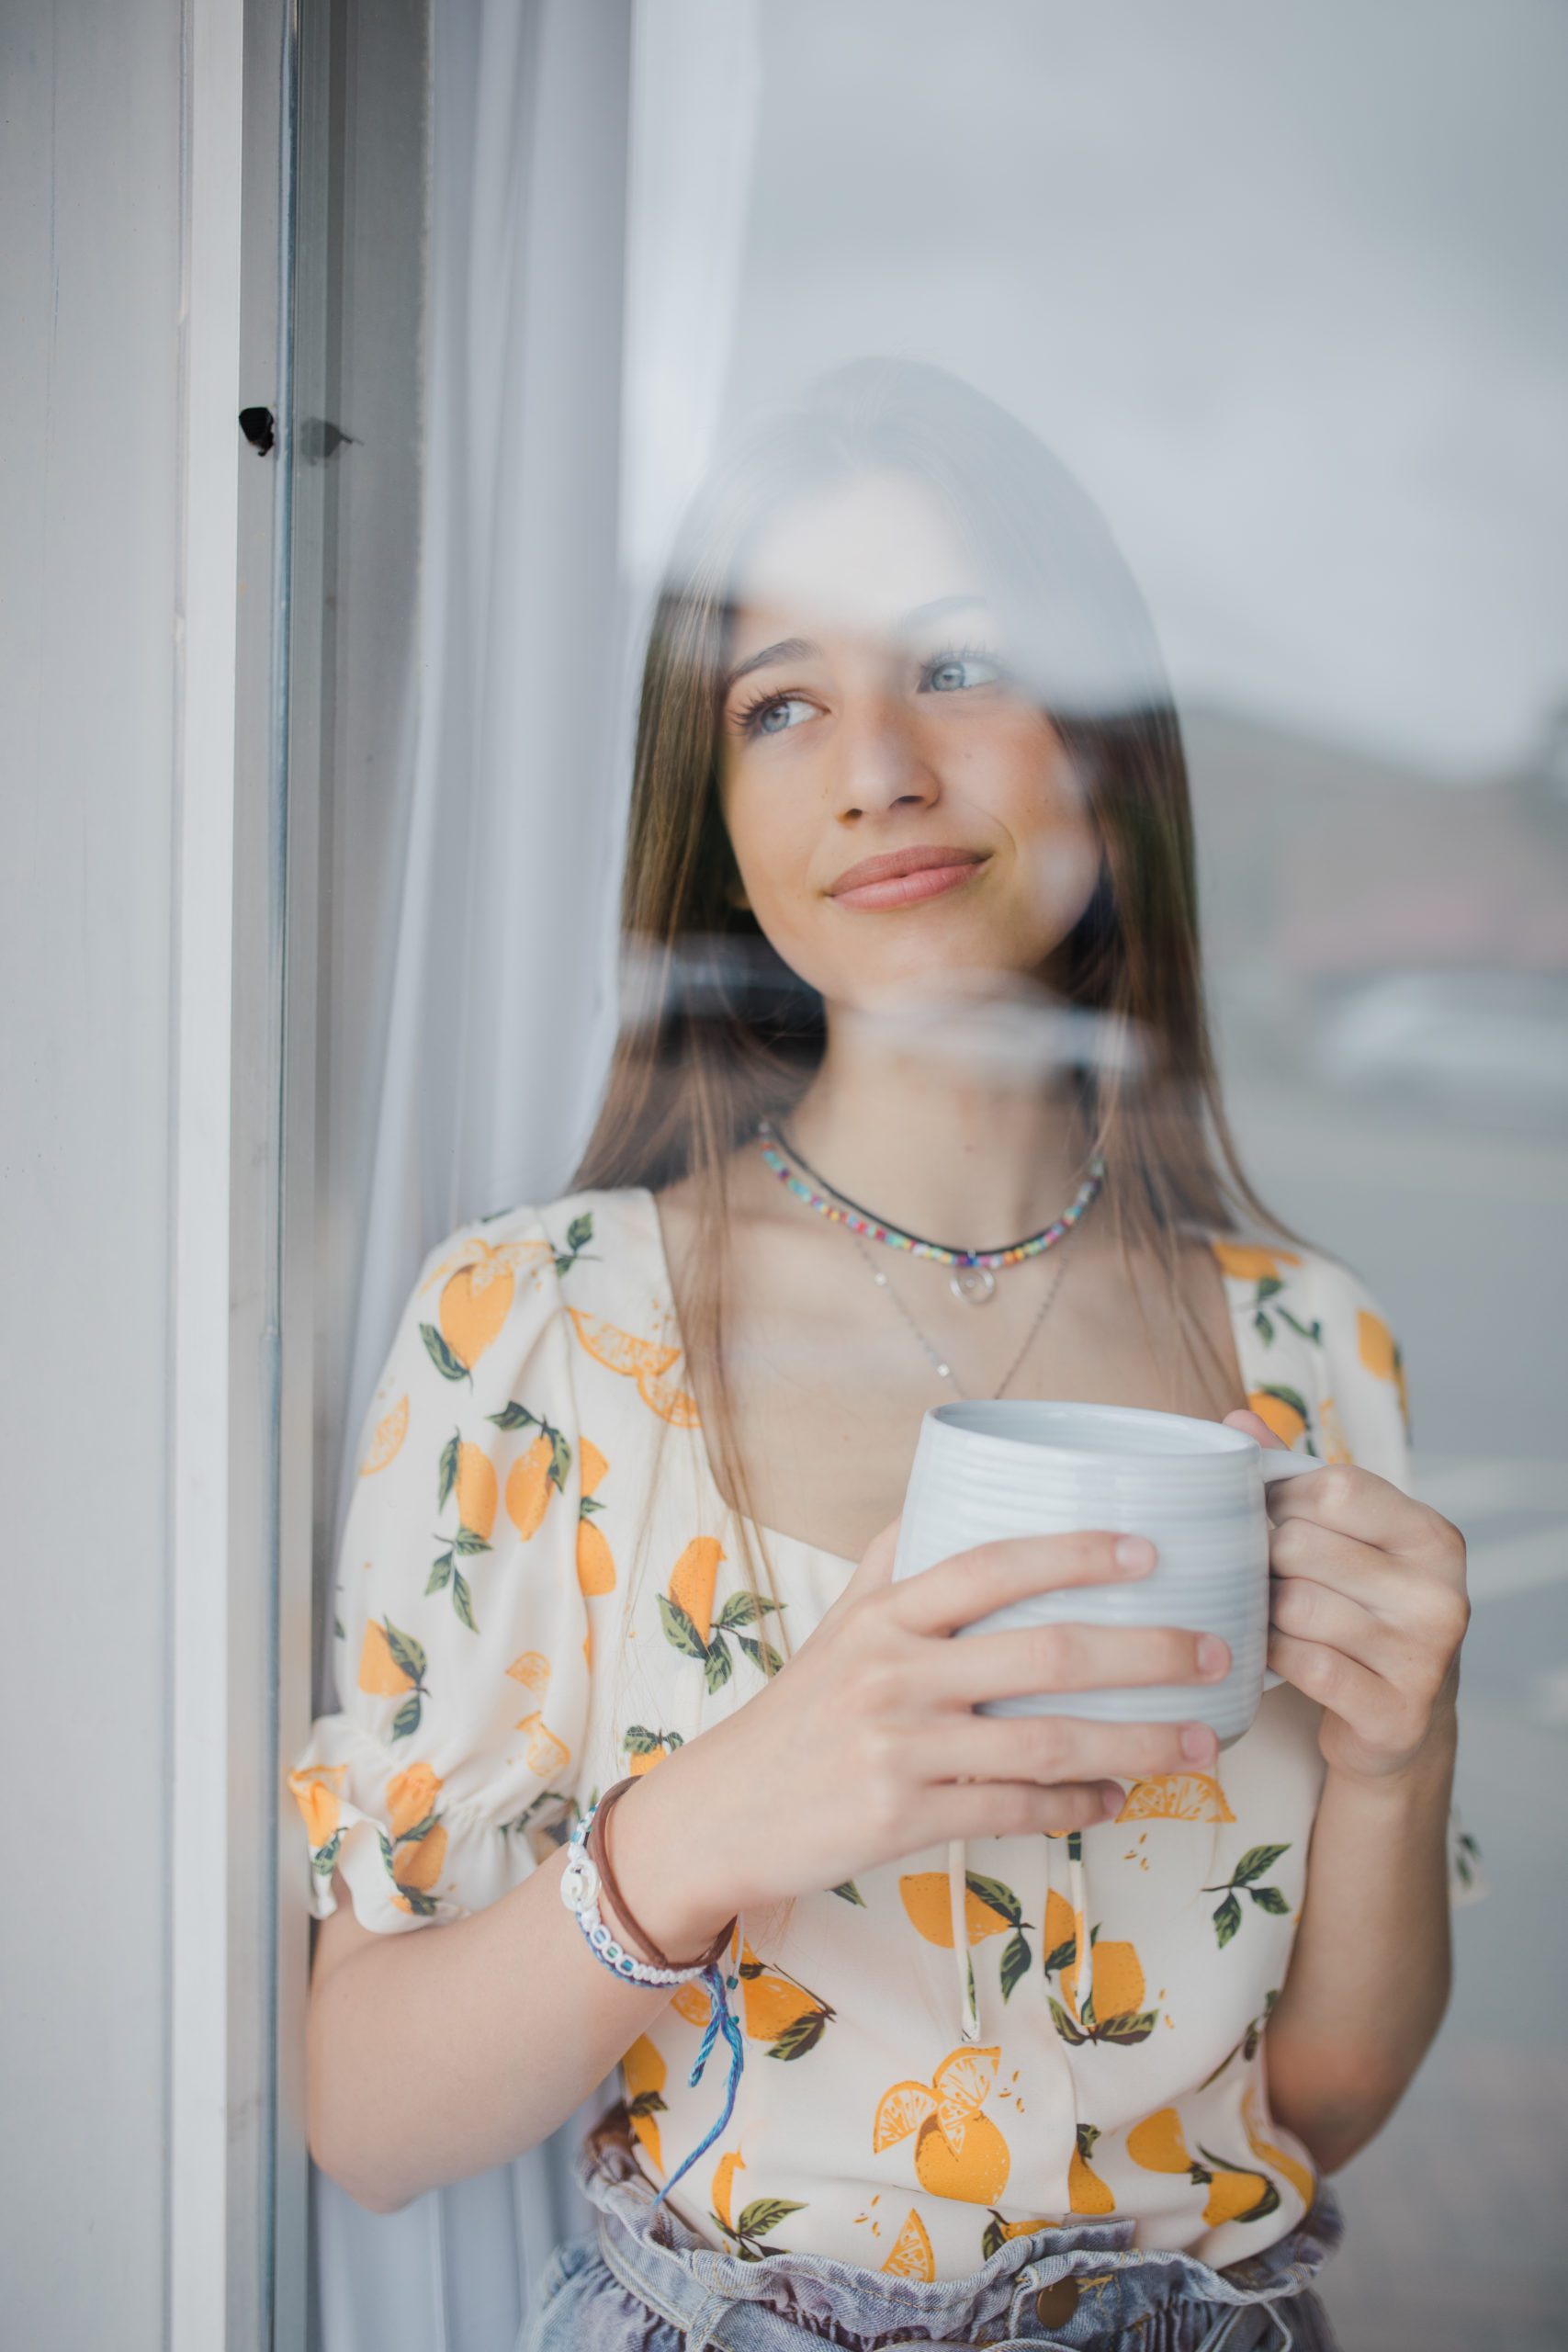 unique senior aesthetic with girl in a window holding her mug as she looks out